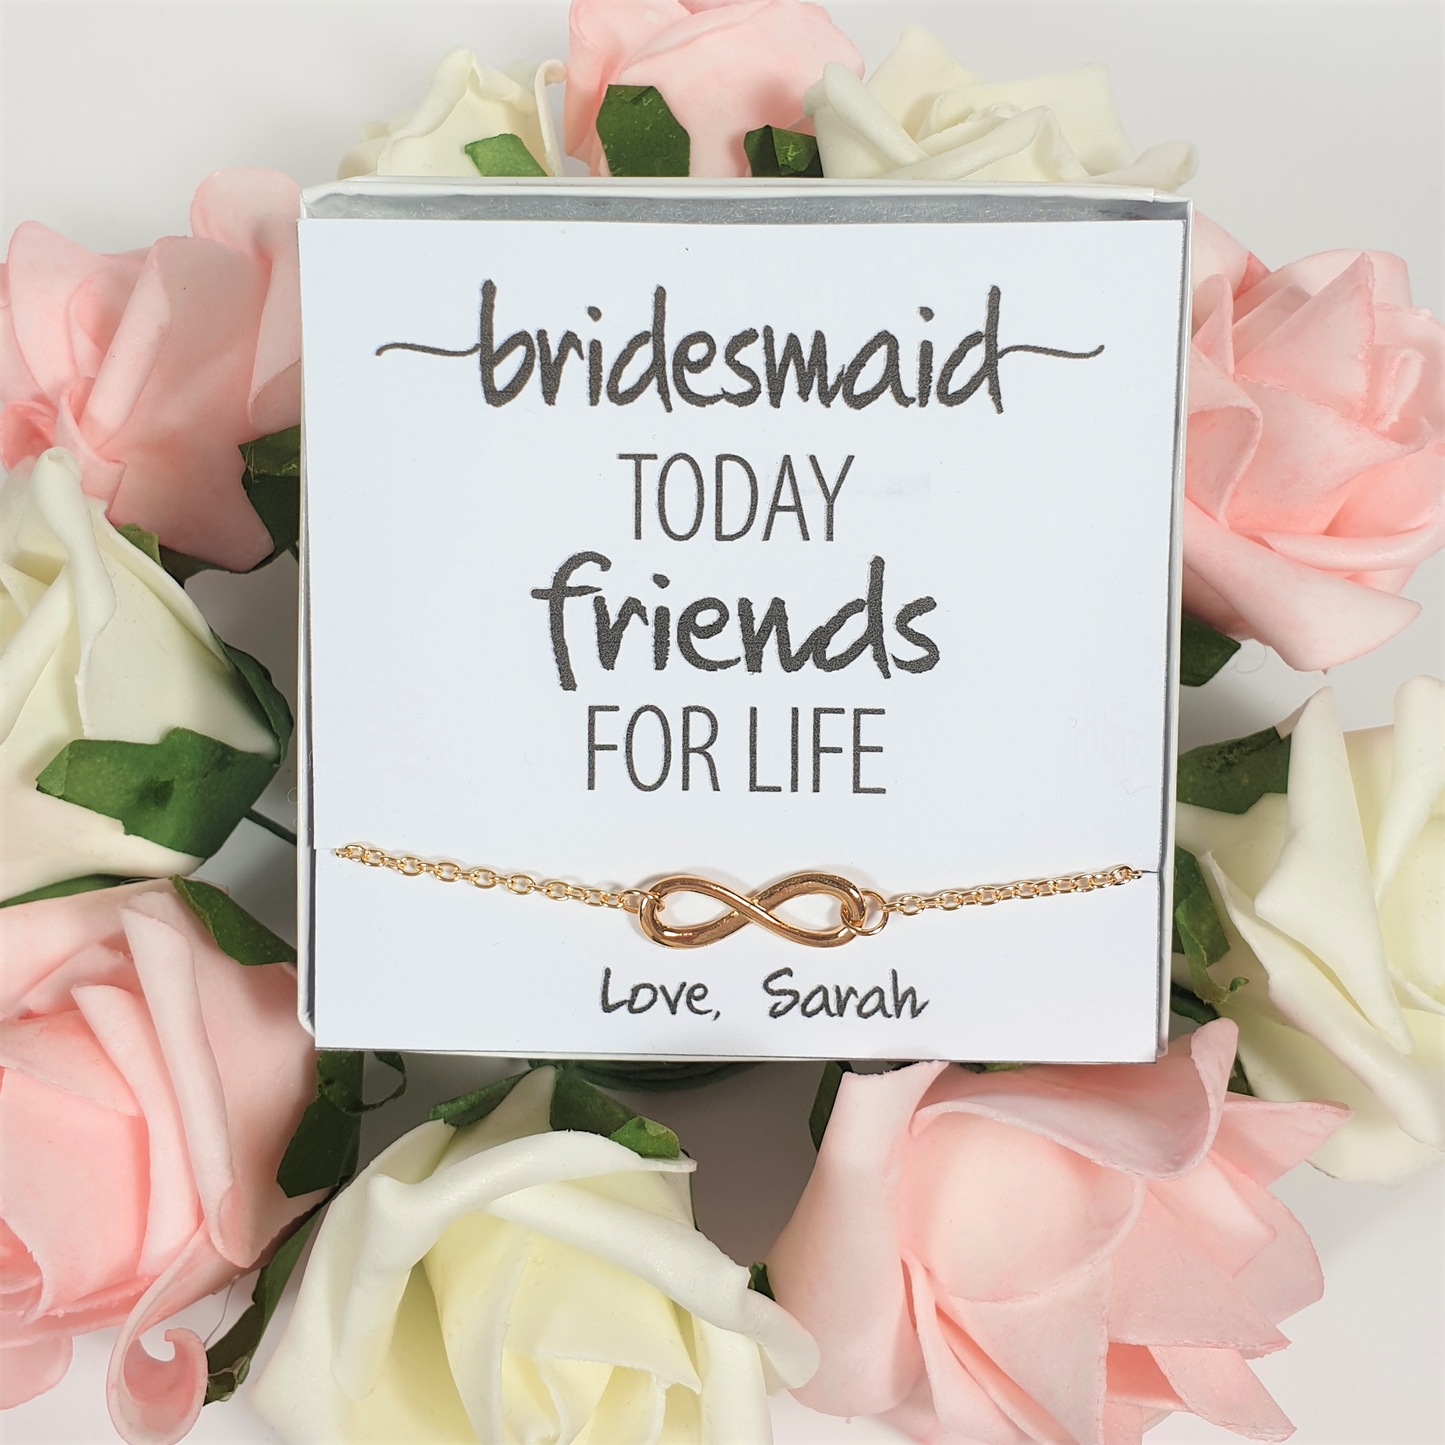 Bridesmaid Today Friends For Life Gift - Infinity Love Bracelet